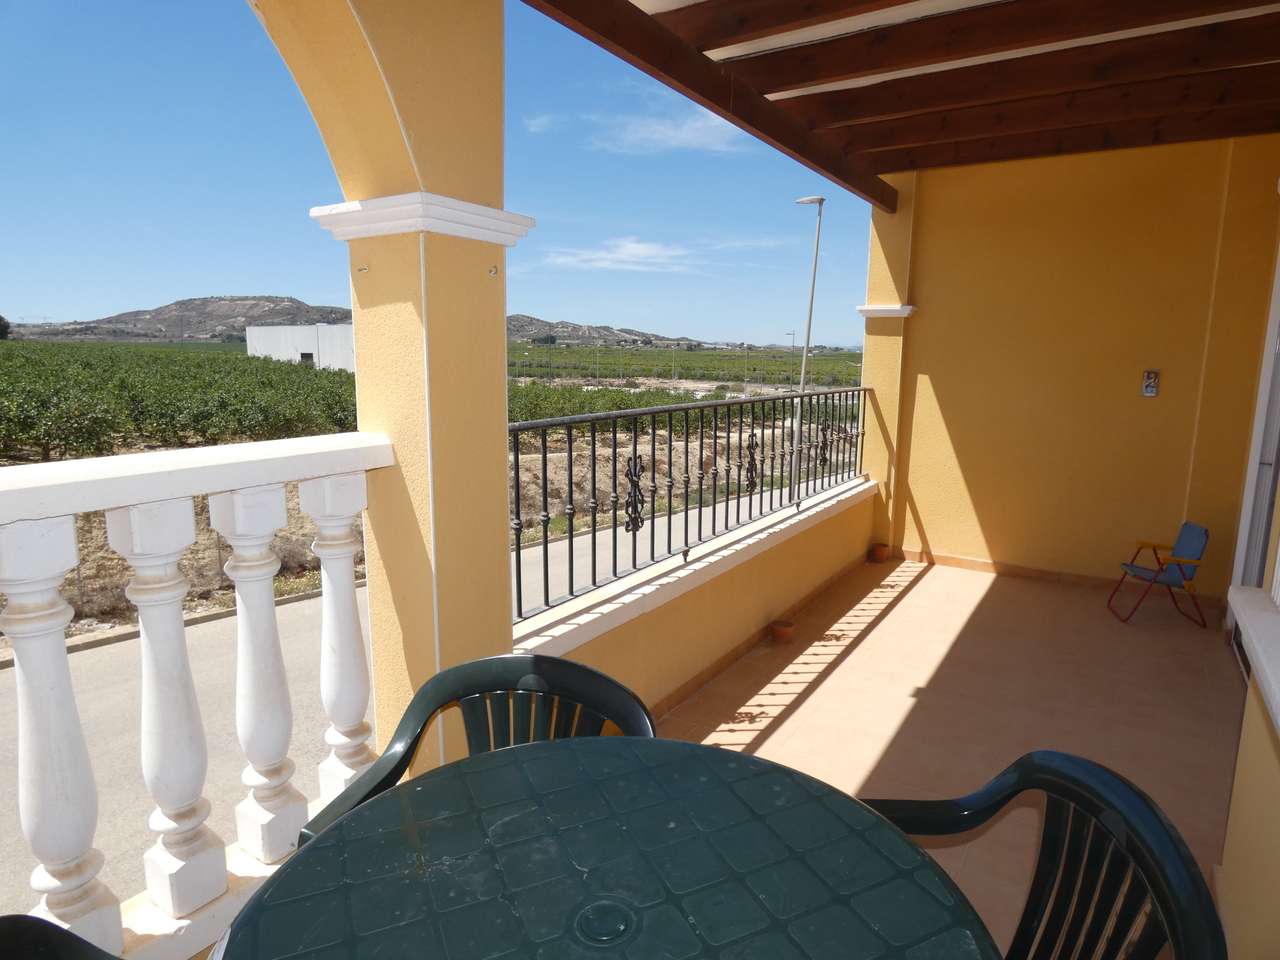 For Sale: Apartment in Algorfa Beds: 2 Baths: 1 Price: 95,995€